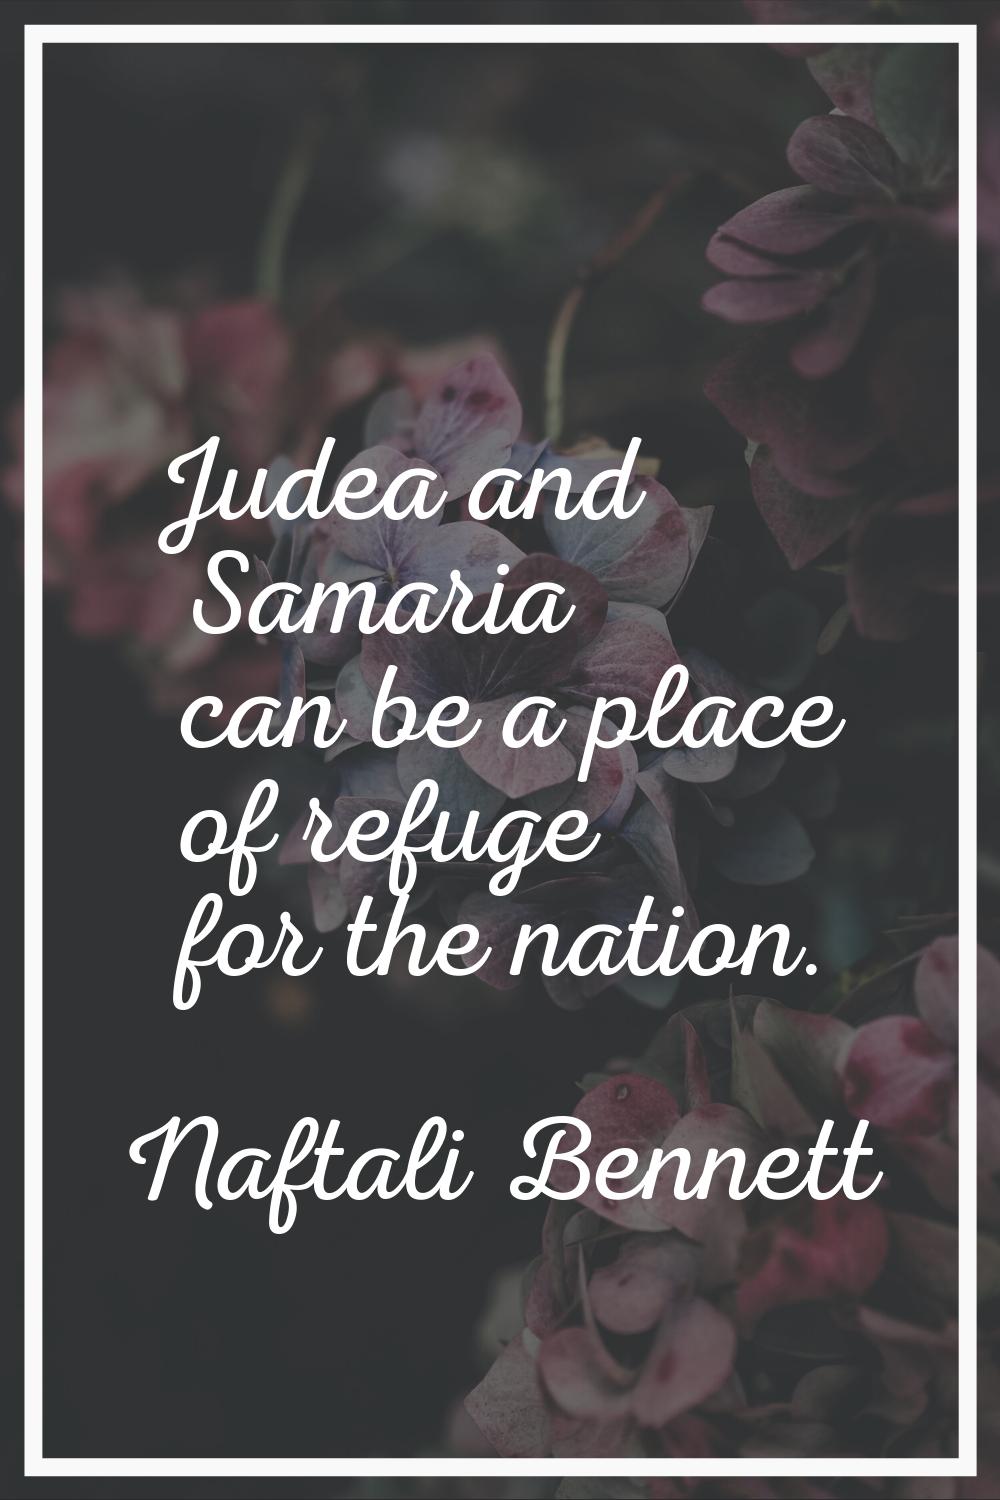 Judea and Samaria can be a place of refuge for the nation.